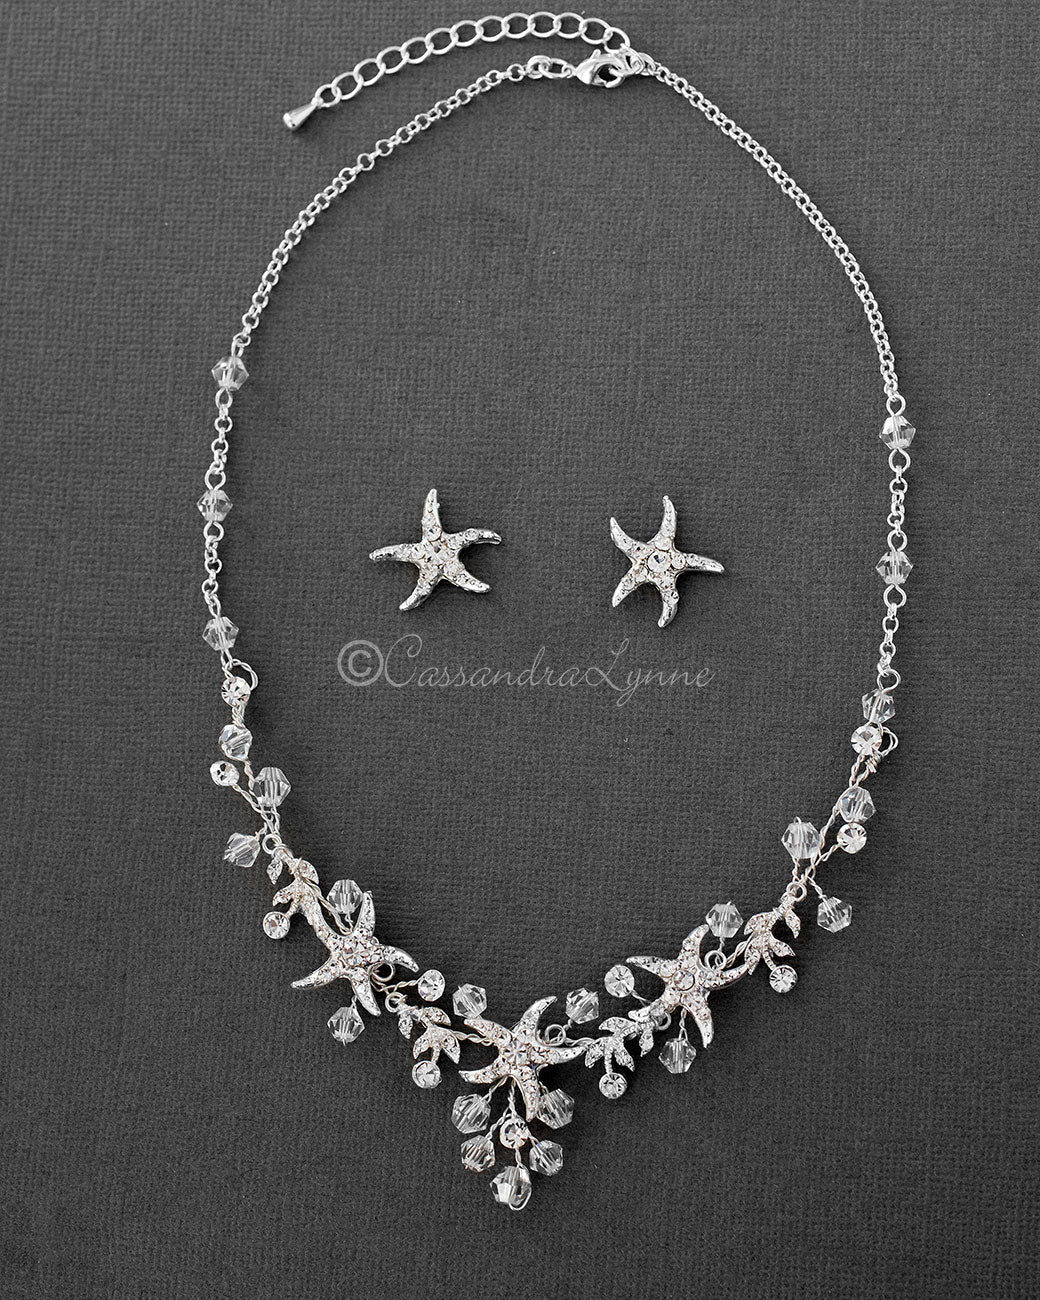 Beach Wedding Necklace with Crystals and Starfish